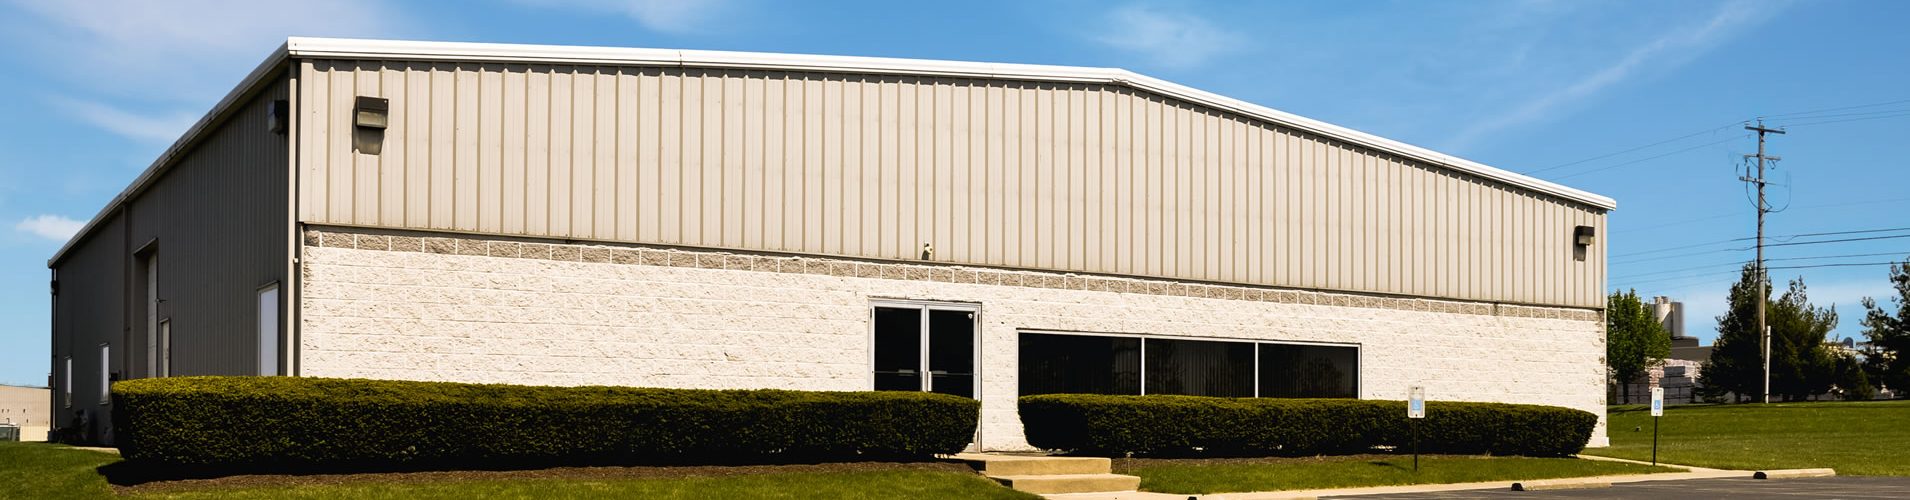 Steel Buildings Serving Dallas, Fort Worth, Arlington, and surrounding Texas cities.